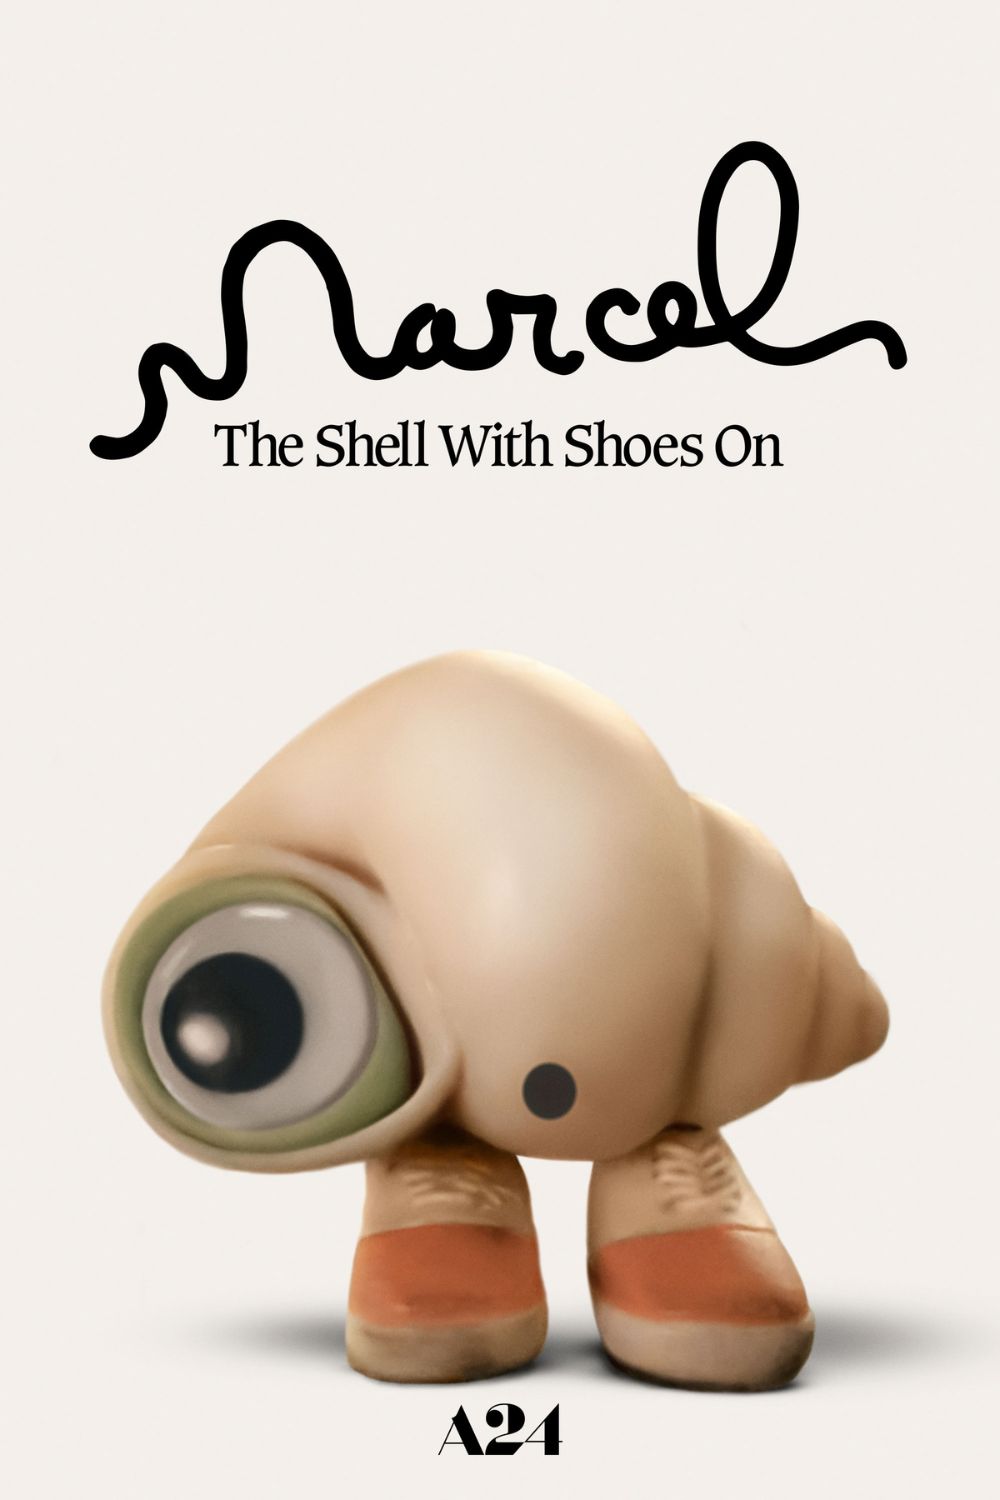 Marcel the Shell with Shoes On wins NCFCa Awards